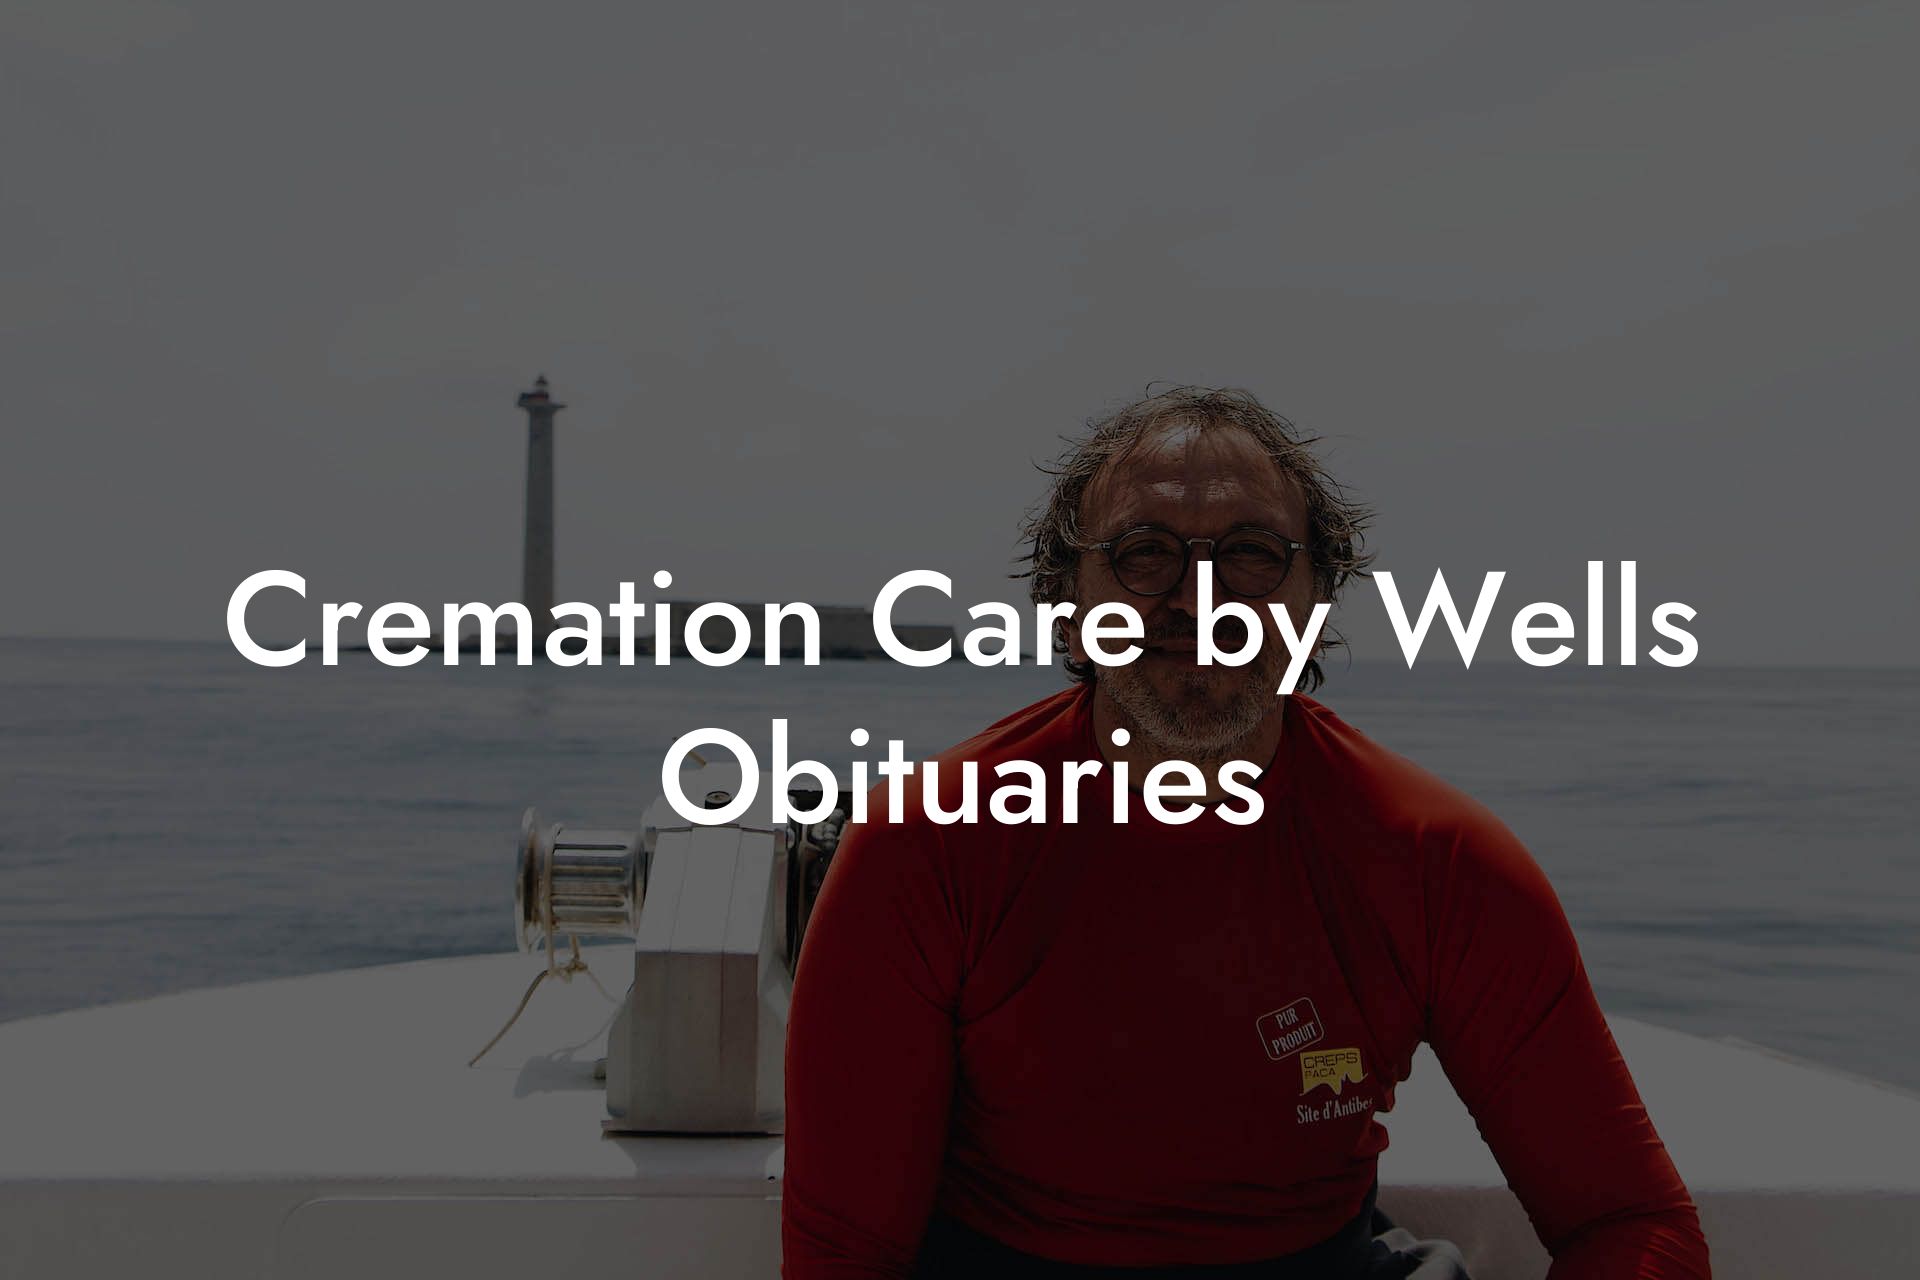 Cremation Care by Wells Obituaries